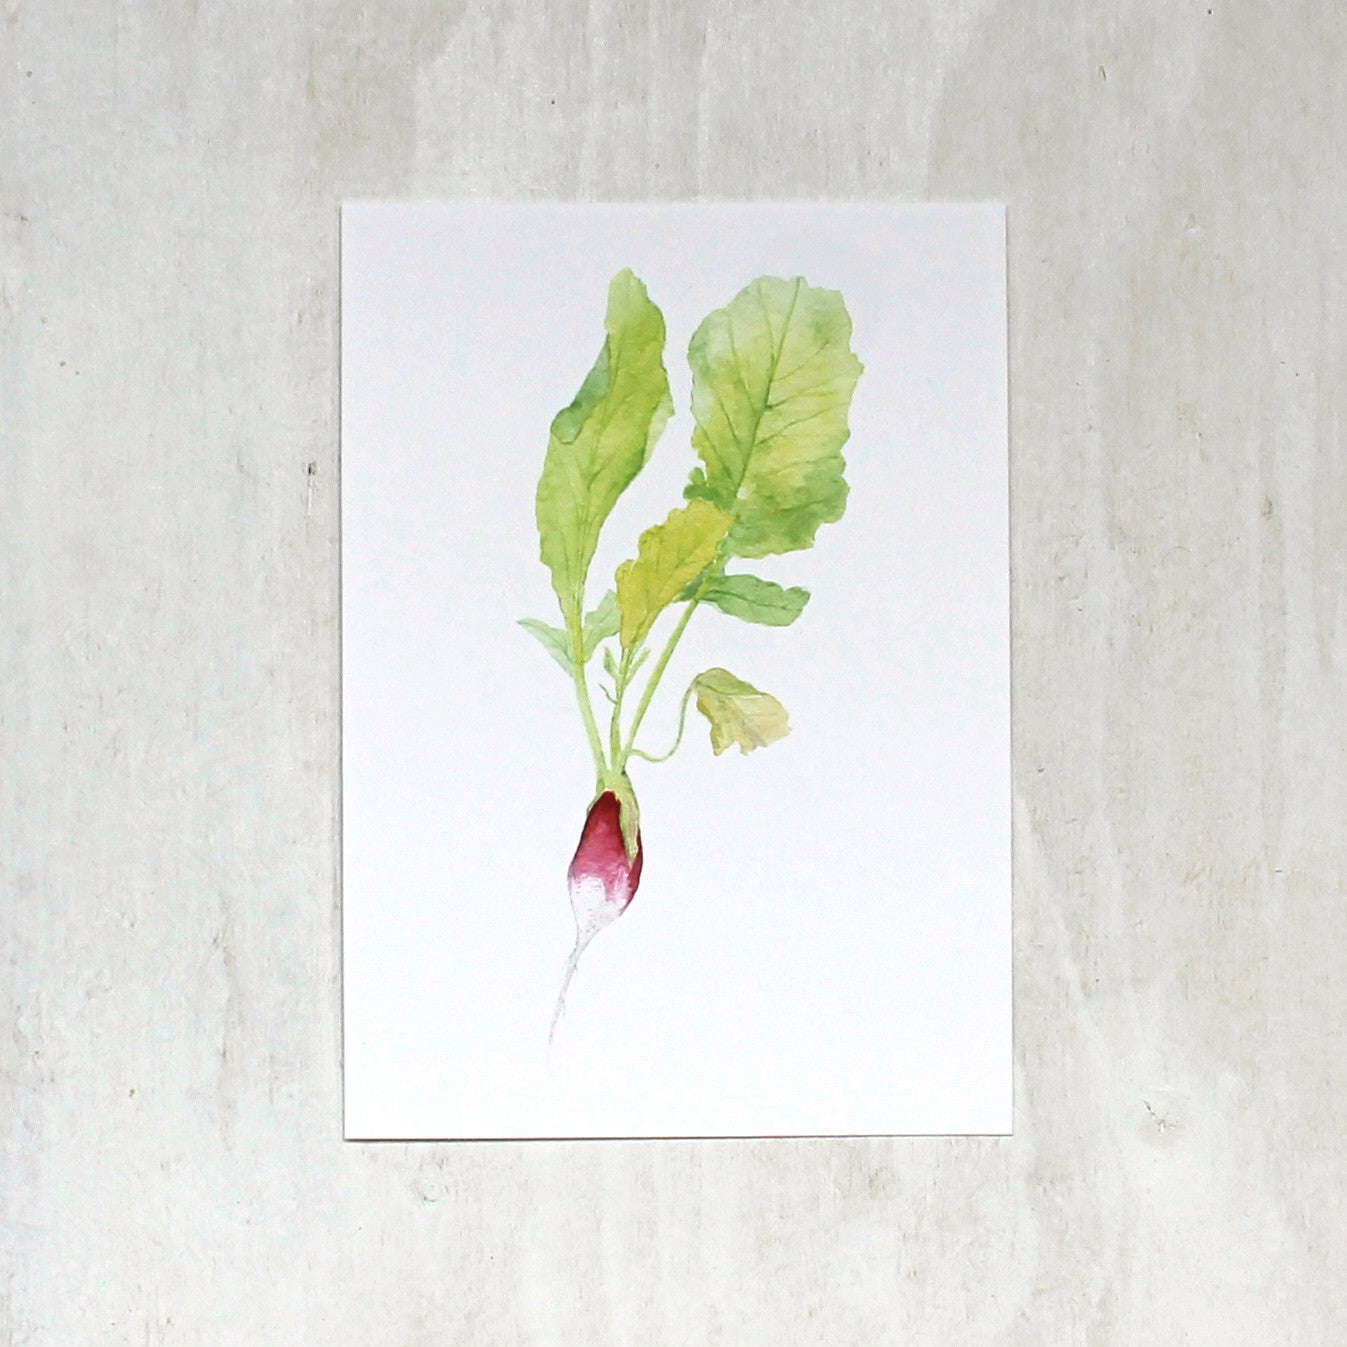 Watercolor print of French breakfast radish by Kathleen Maunder